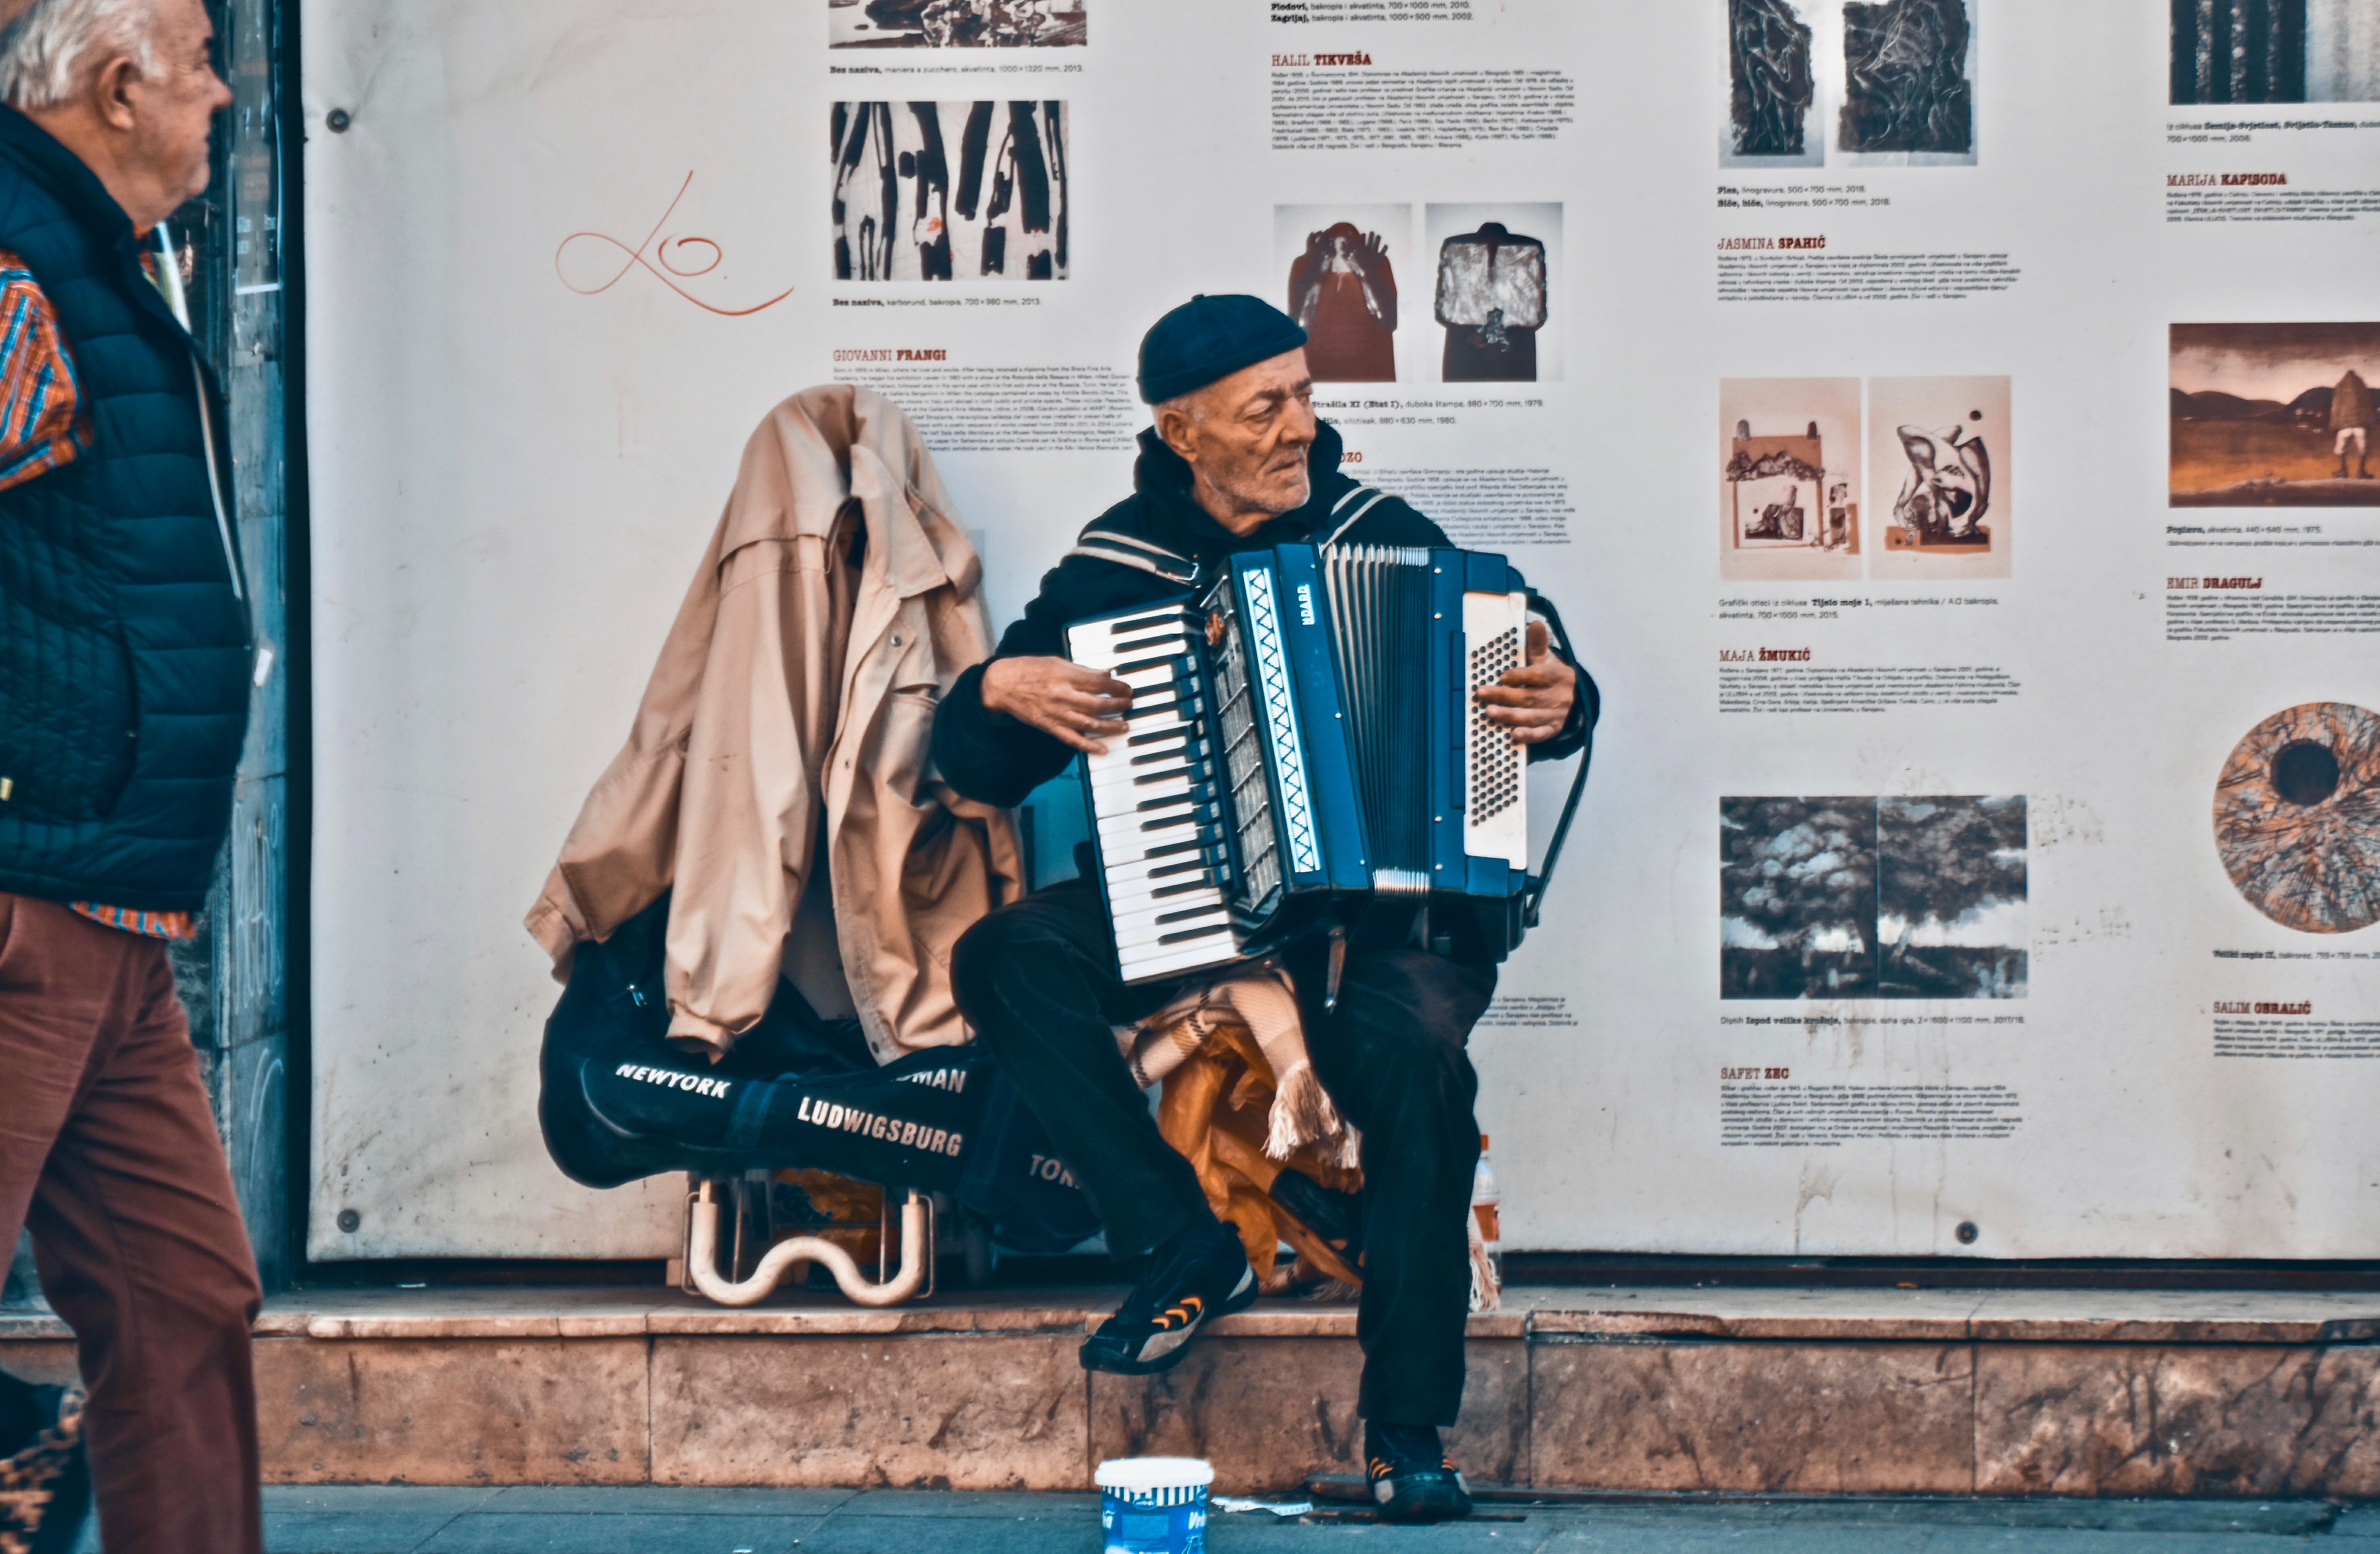 Student work from the "Something Sarajevo" assignment: Local artists and street performers show off their talents to passers-by, adding to Sarajevo’s charm and intrigue. This man plays his accordion, an instrument that is commonly found in one of Bosnia’s most notable genres of folk music called Sevdalinka. Sevdalinka songs are often about love or unrequited love and are characterized by slow or moderate tempos with intense, emotional melodies. © Ibrahim Khaled Al-Zoubi